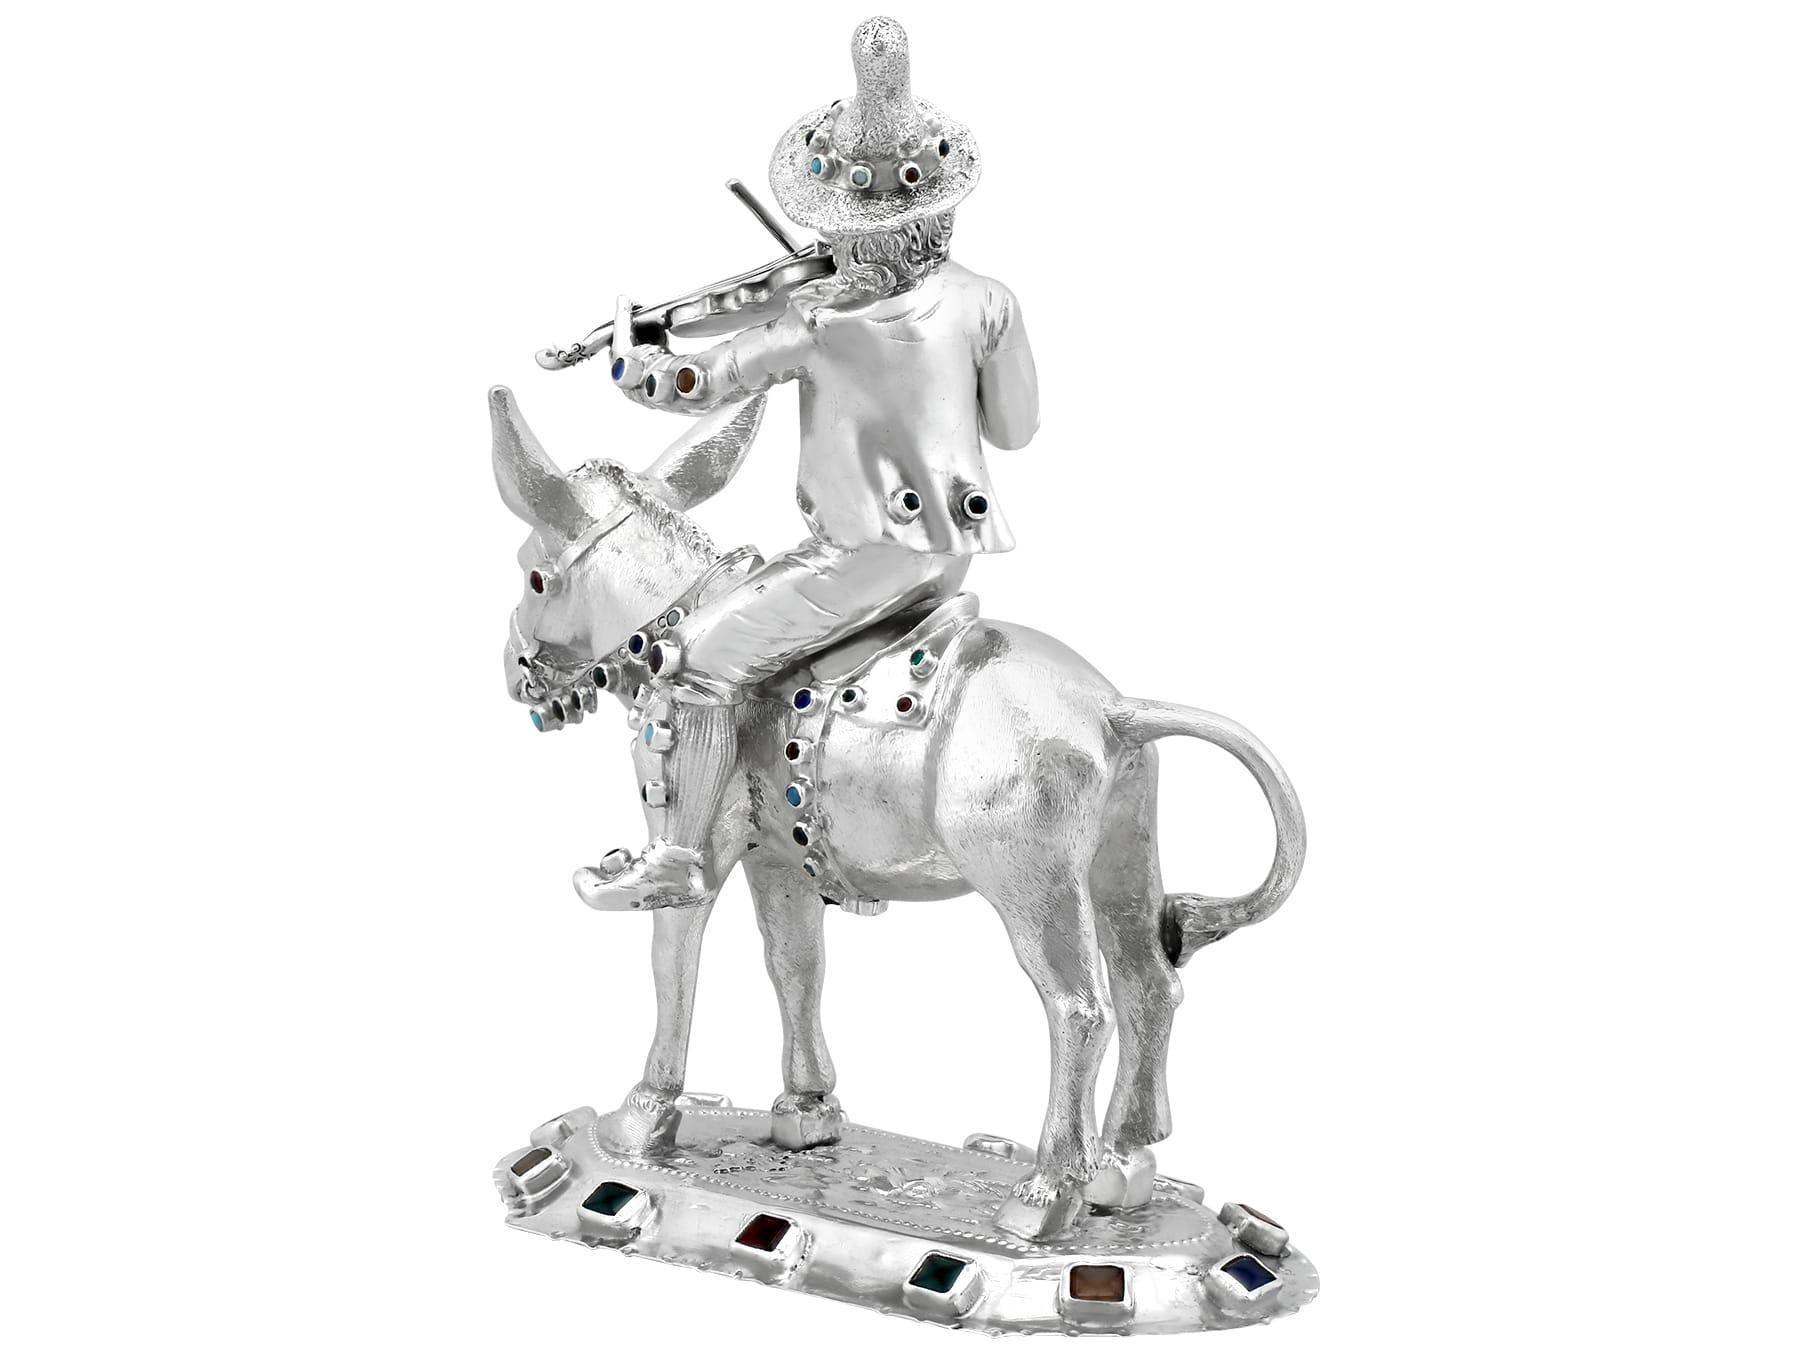 Antique Austro-Hungarian Silver Musician and Donkey Table Ornament In Excellent Condition For Sale In Jesmond, Newcastle Upon Tyne